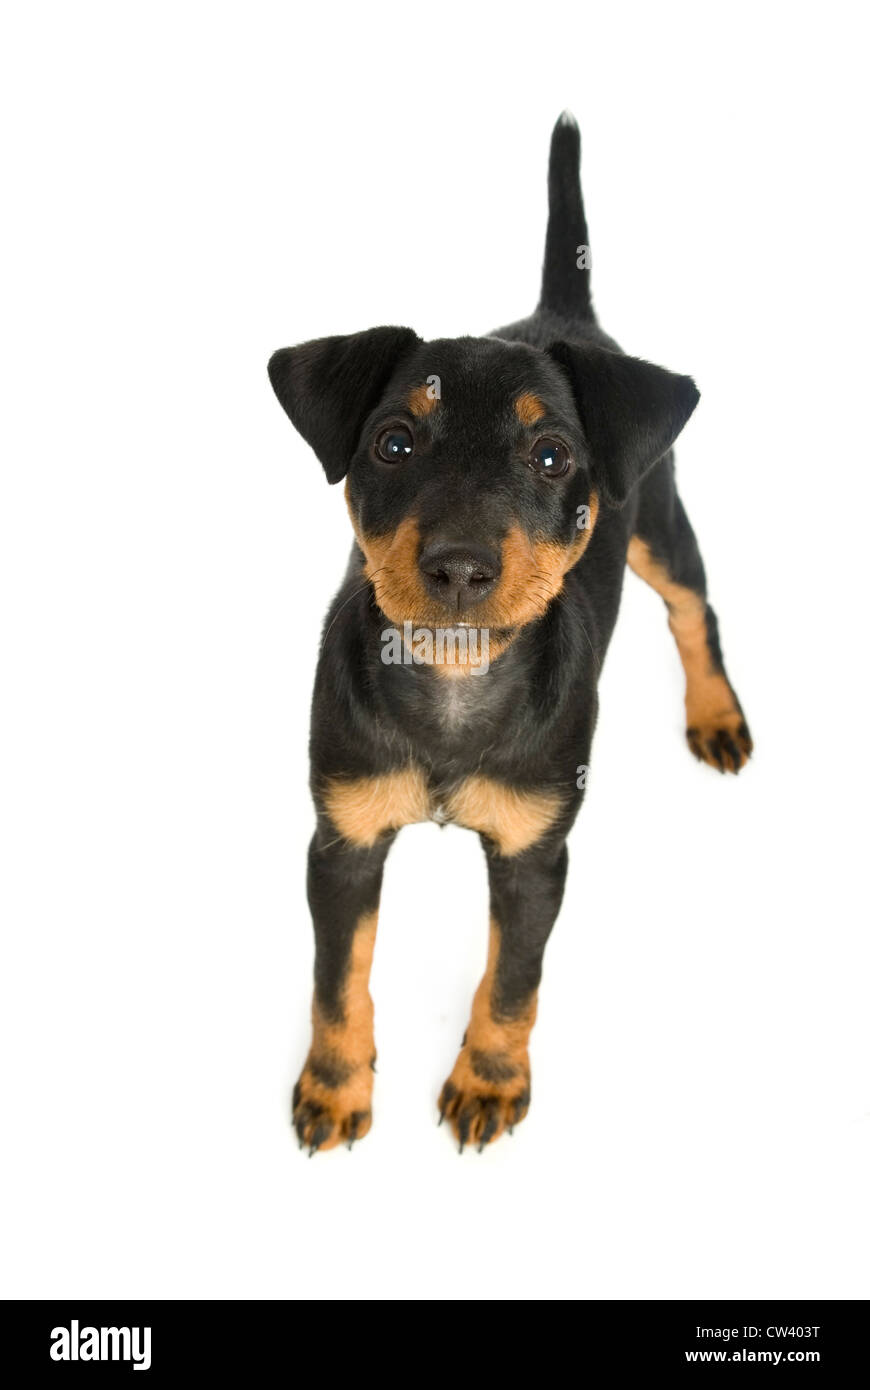 Jagdterrier, German Hunt Terrier. Puppy looking into the camera, standing. Studio picture against a white background Stock Photo